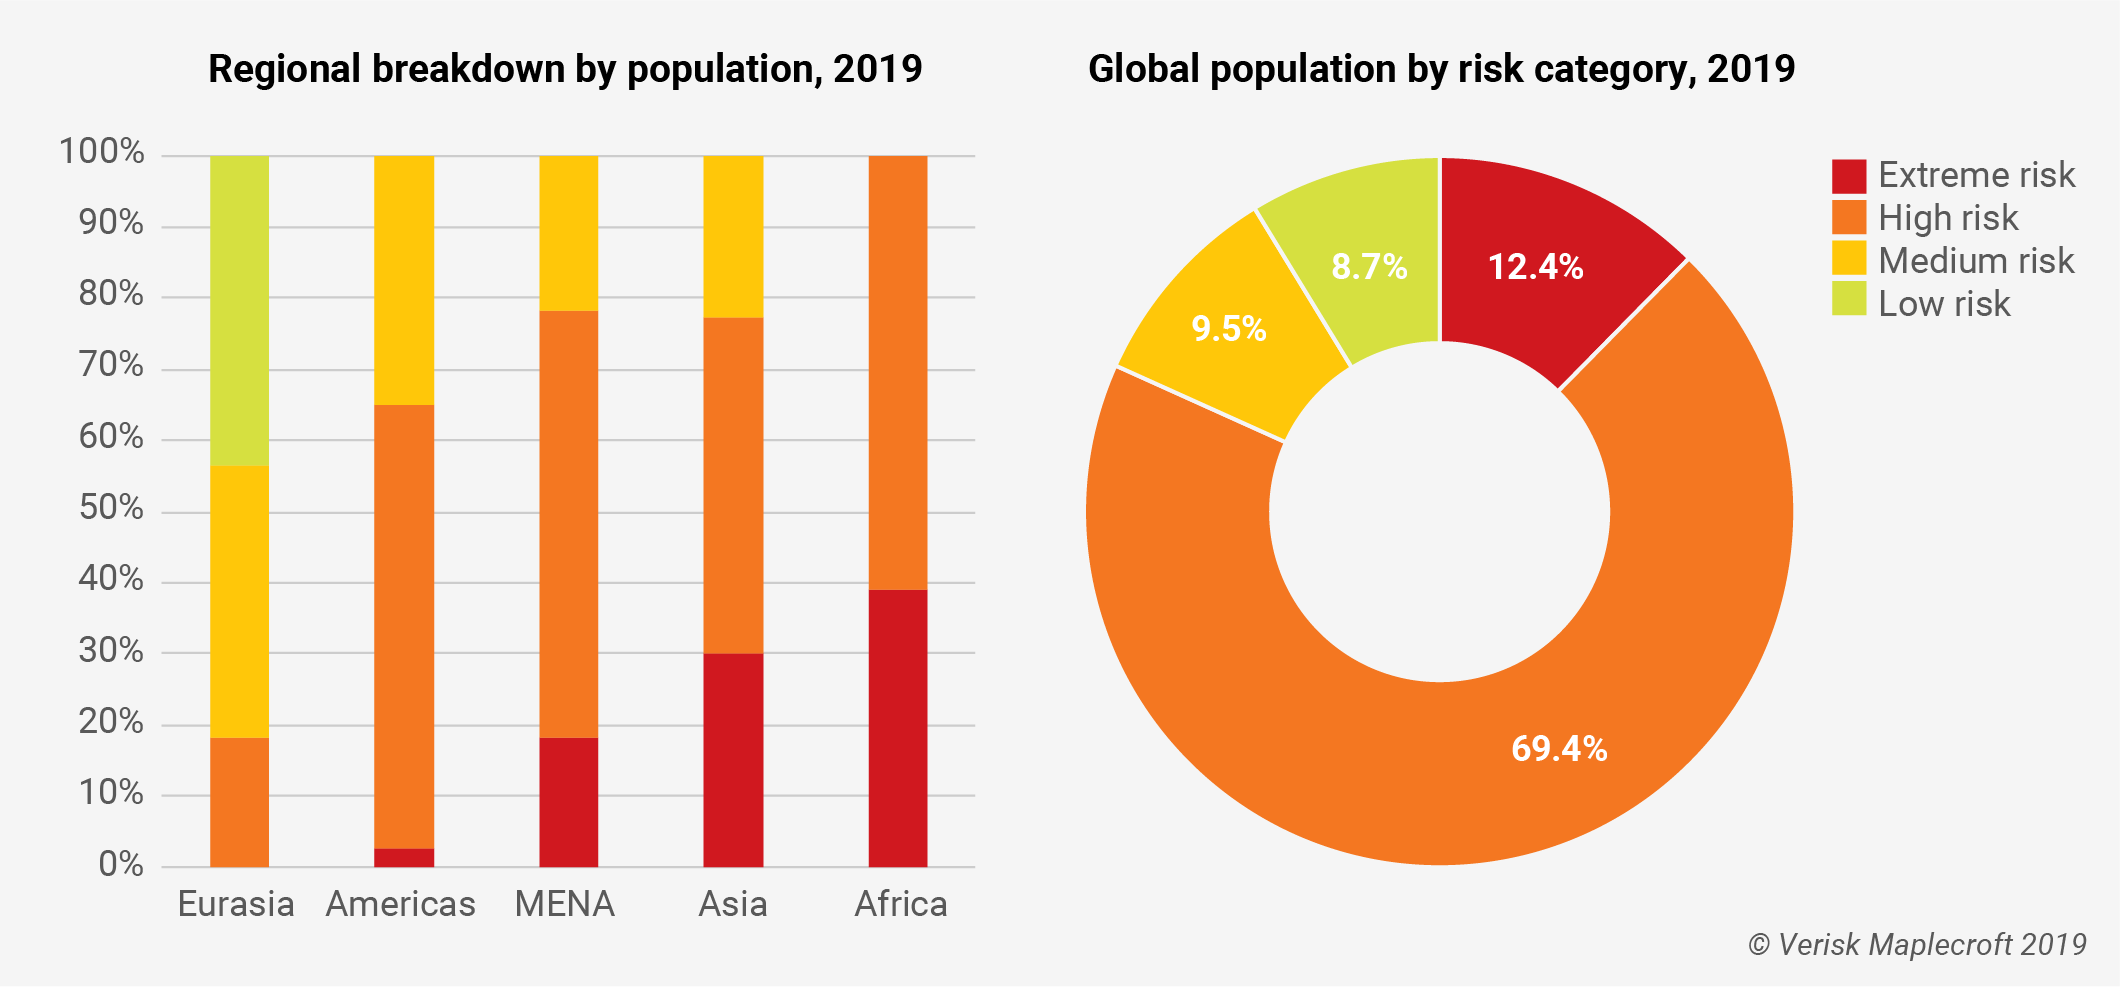 Child Labour Index 2019 – How the risks stack up for populations